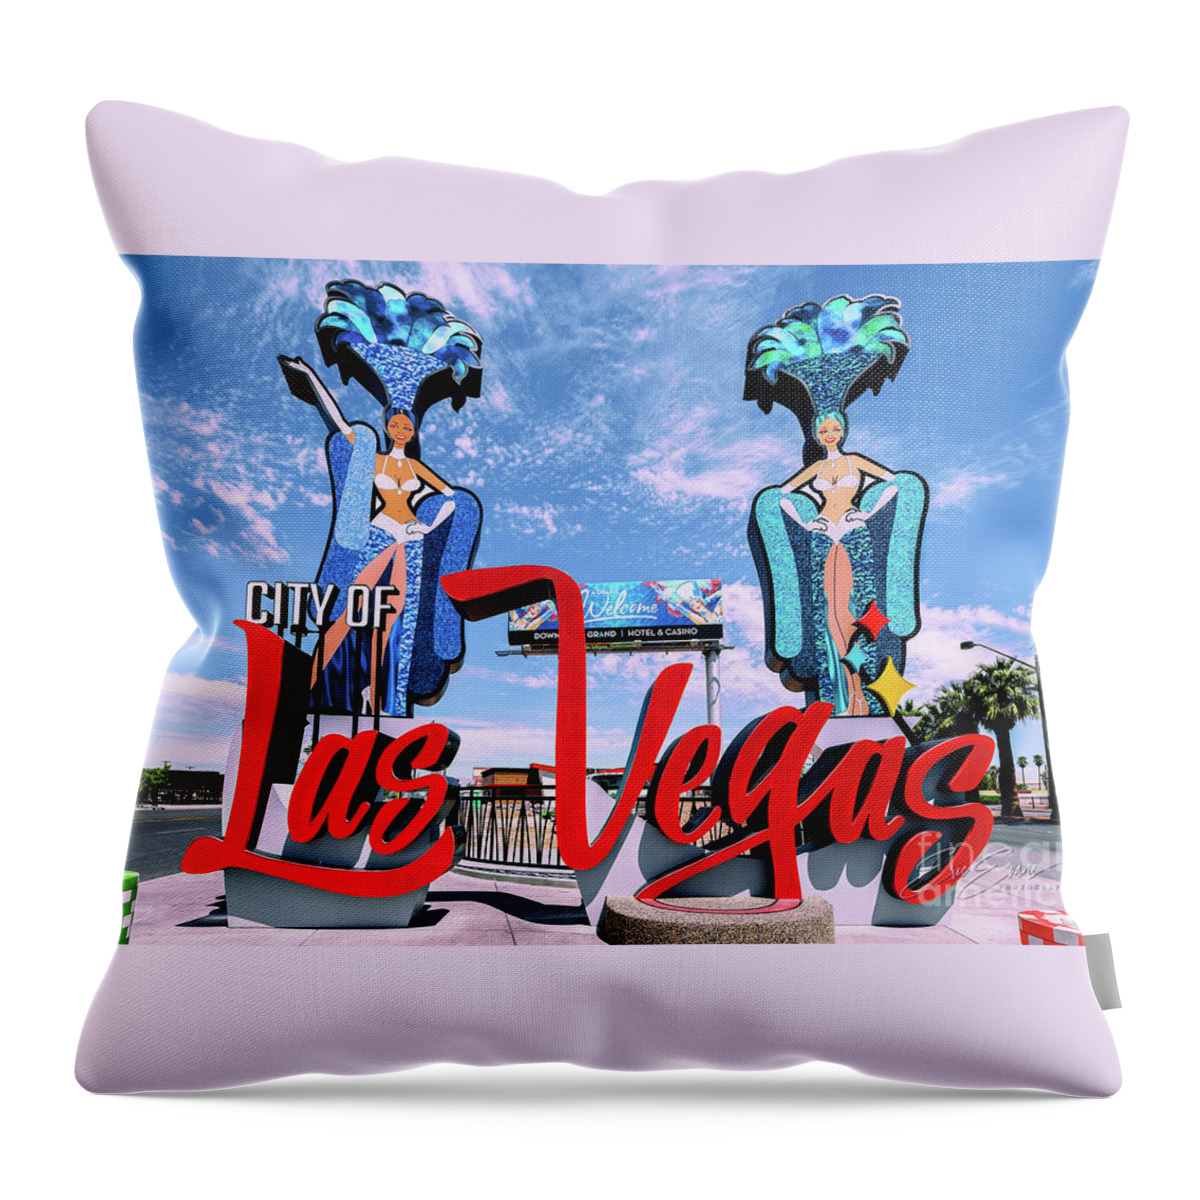 Post Card Throw Pillow featuring the photograph City Of Las Vegas Sign Post Card by Aloha Art